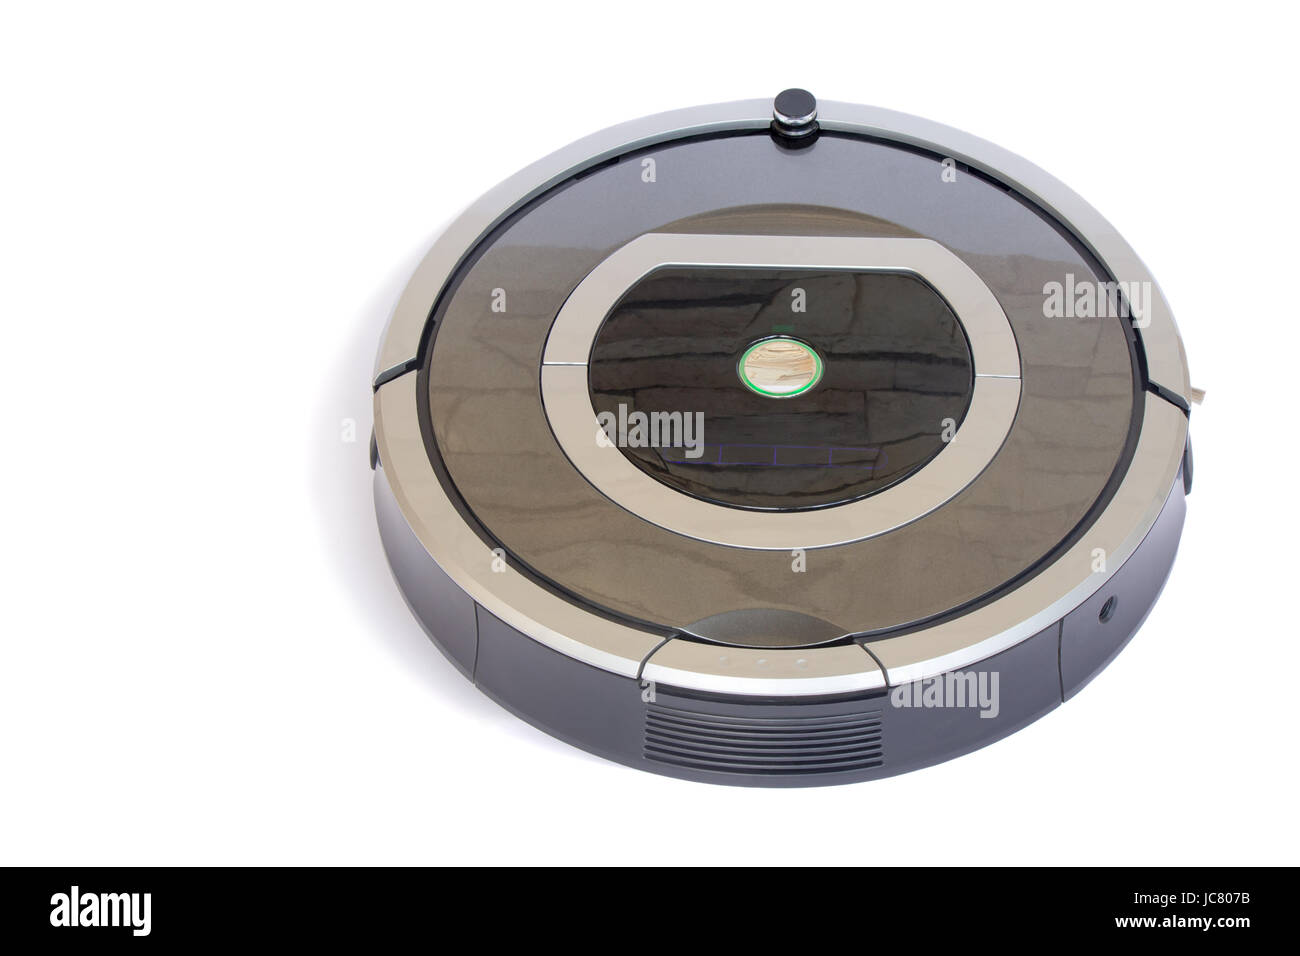 The automated robot vacuum cleaner of a roundish form, can make cleaning in hard-to-reach spots. It is presented on a white background. Stock Photo